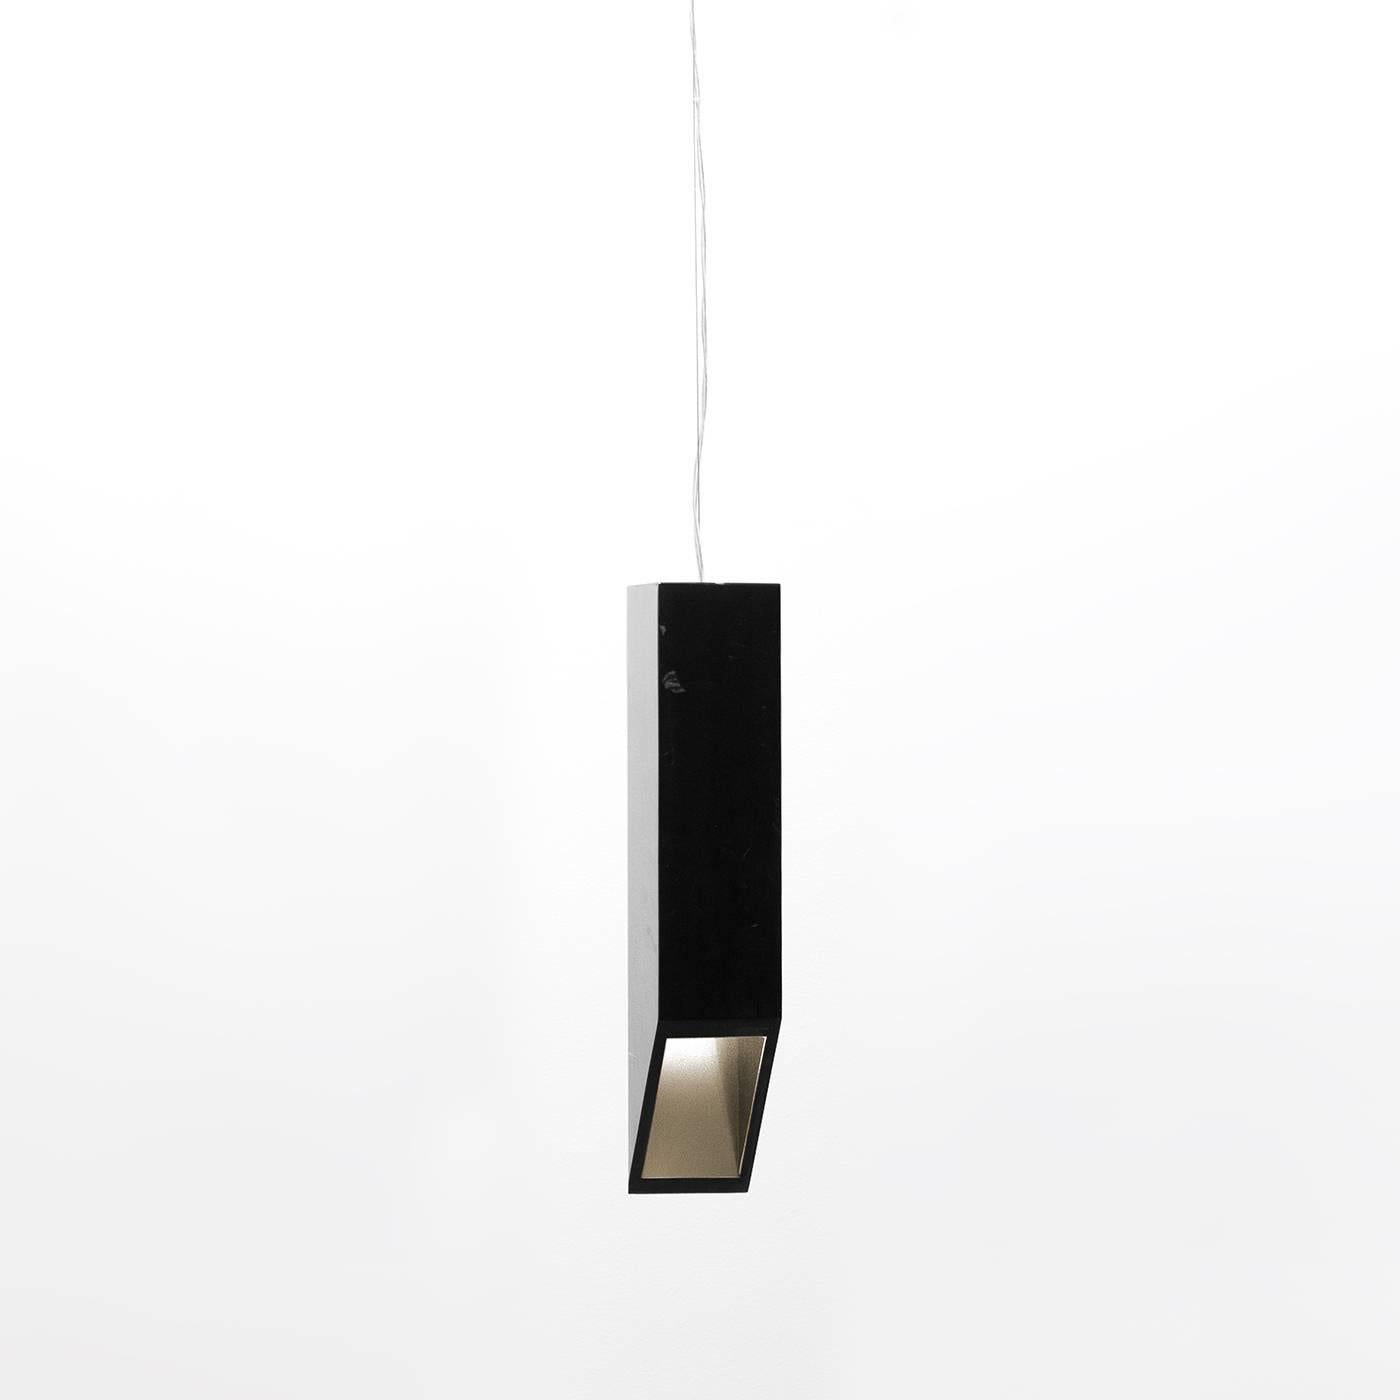 Designed by Joe Gentile and Fabio Crippa of Studio ADL, this ceiling lamp will make a statement in a contemporary living room or dining room and can be displayed alone or combined with the other pieces from the Donatello collection. Its simple